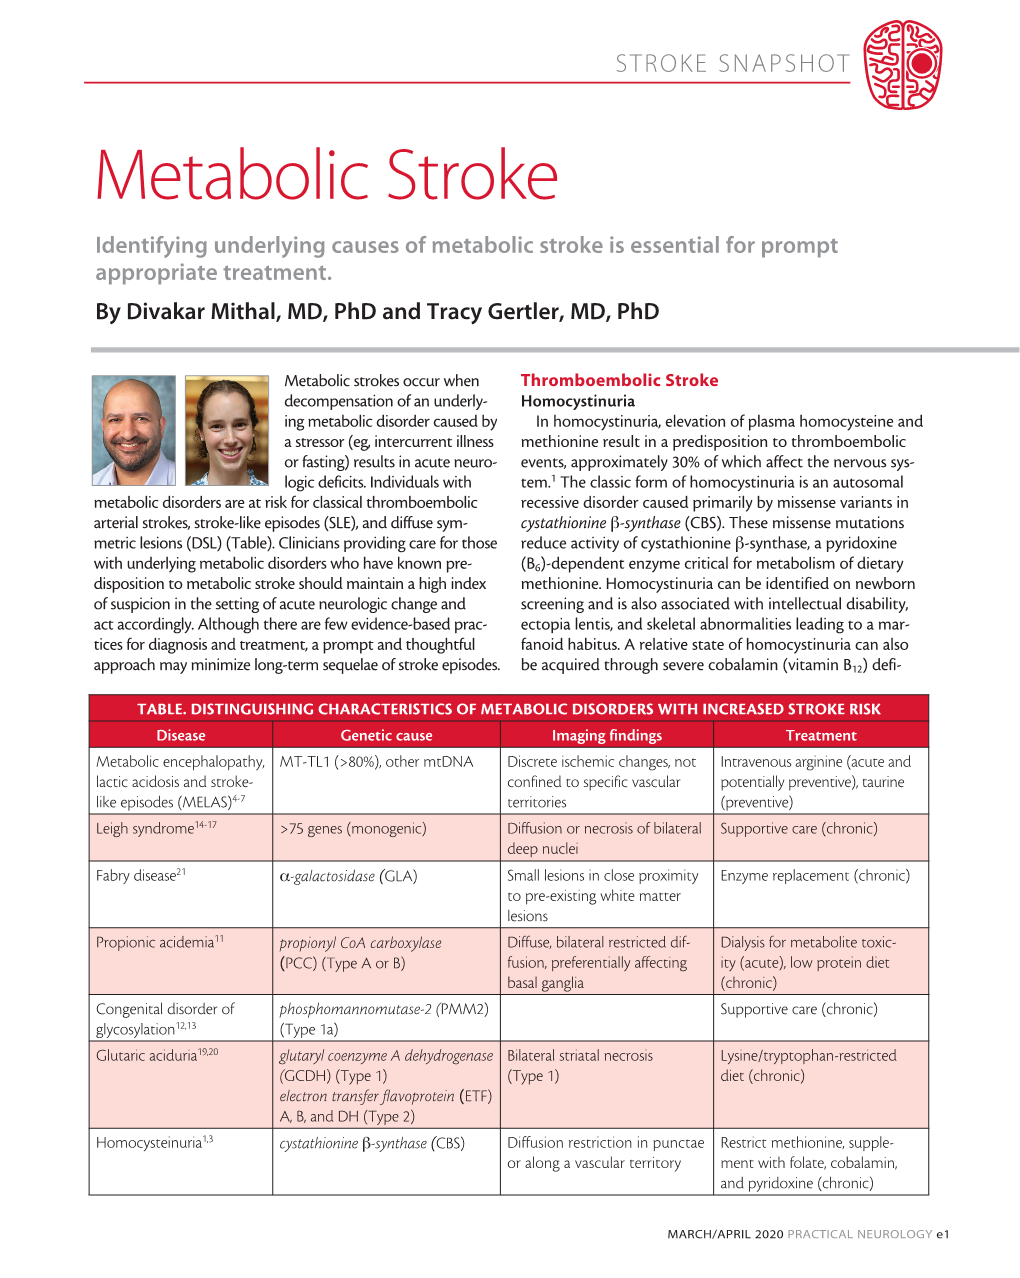 Metabolic Stroke Identifying Underlying Causes of Metabolic Stroke Is Essential for Prompt Appropriate Treatment